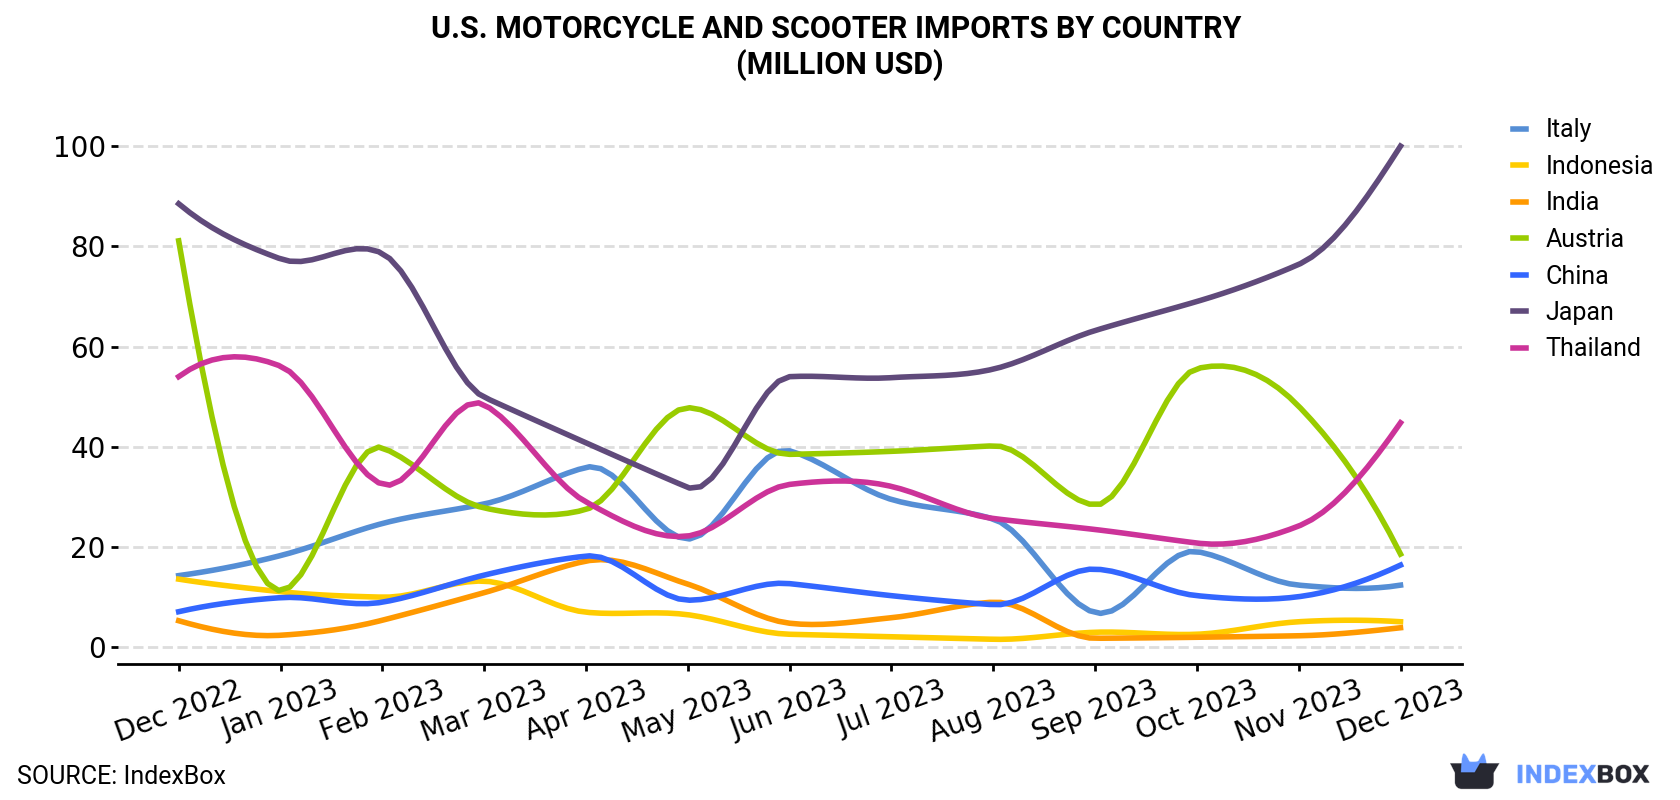 U.S. Motorcycle and Scooter Imports By Country (Million USD)